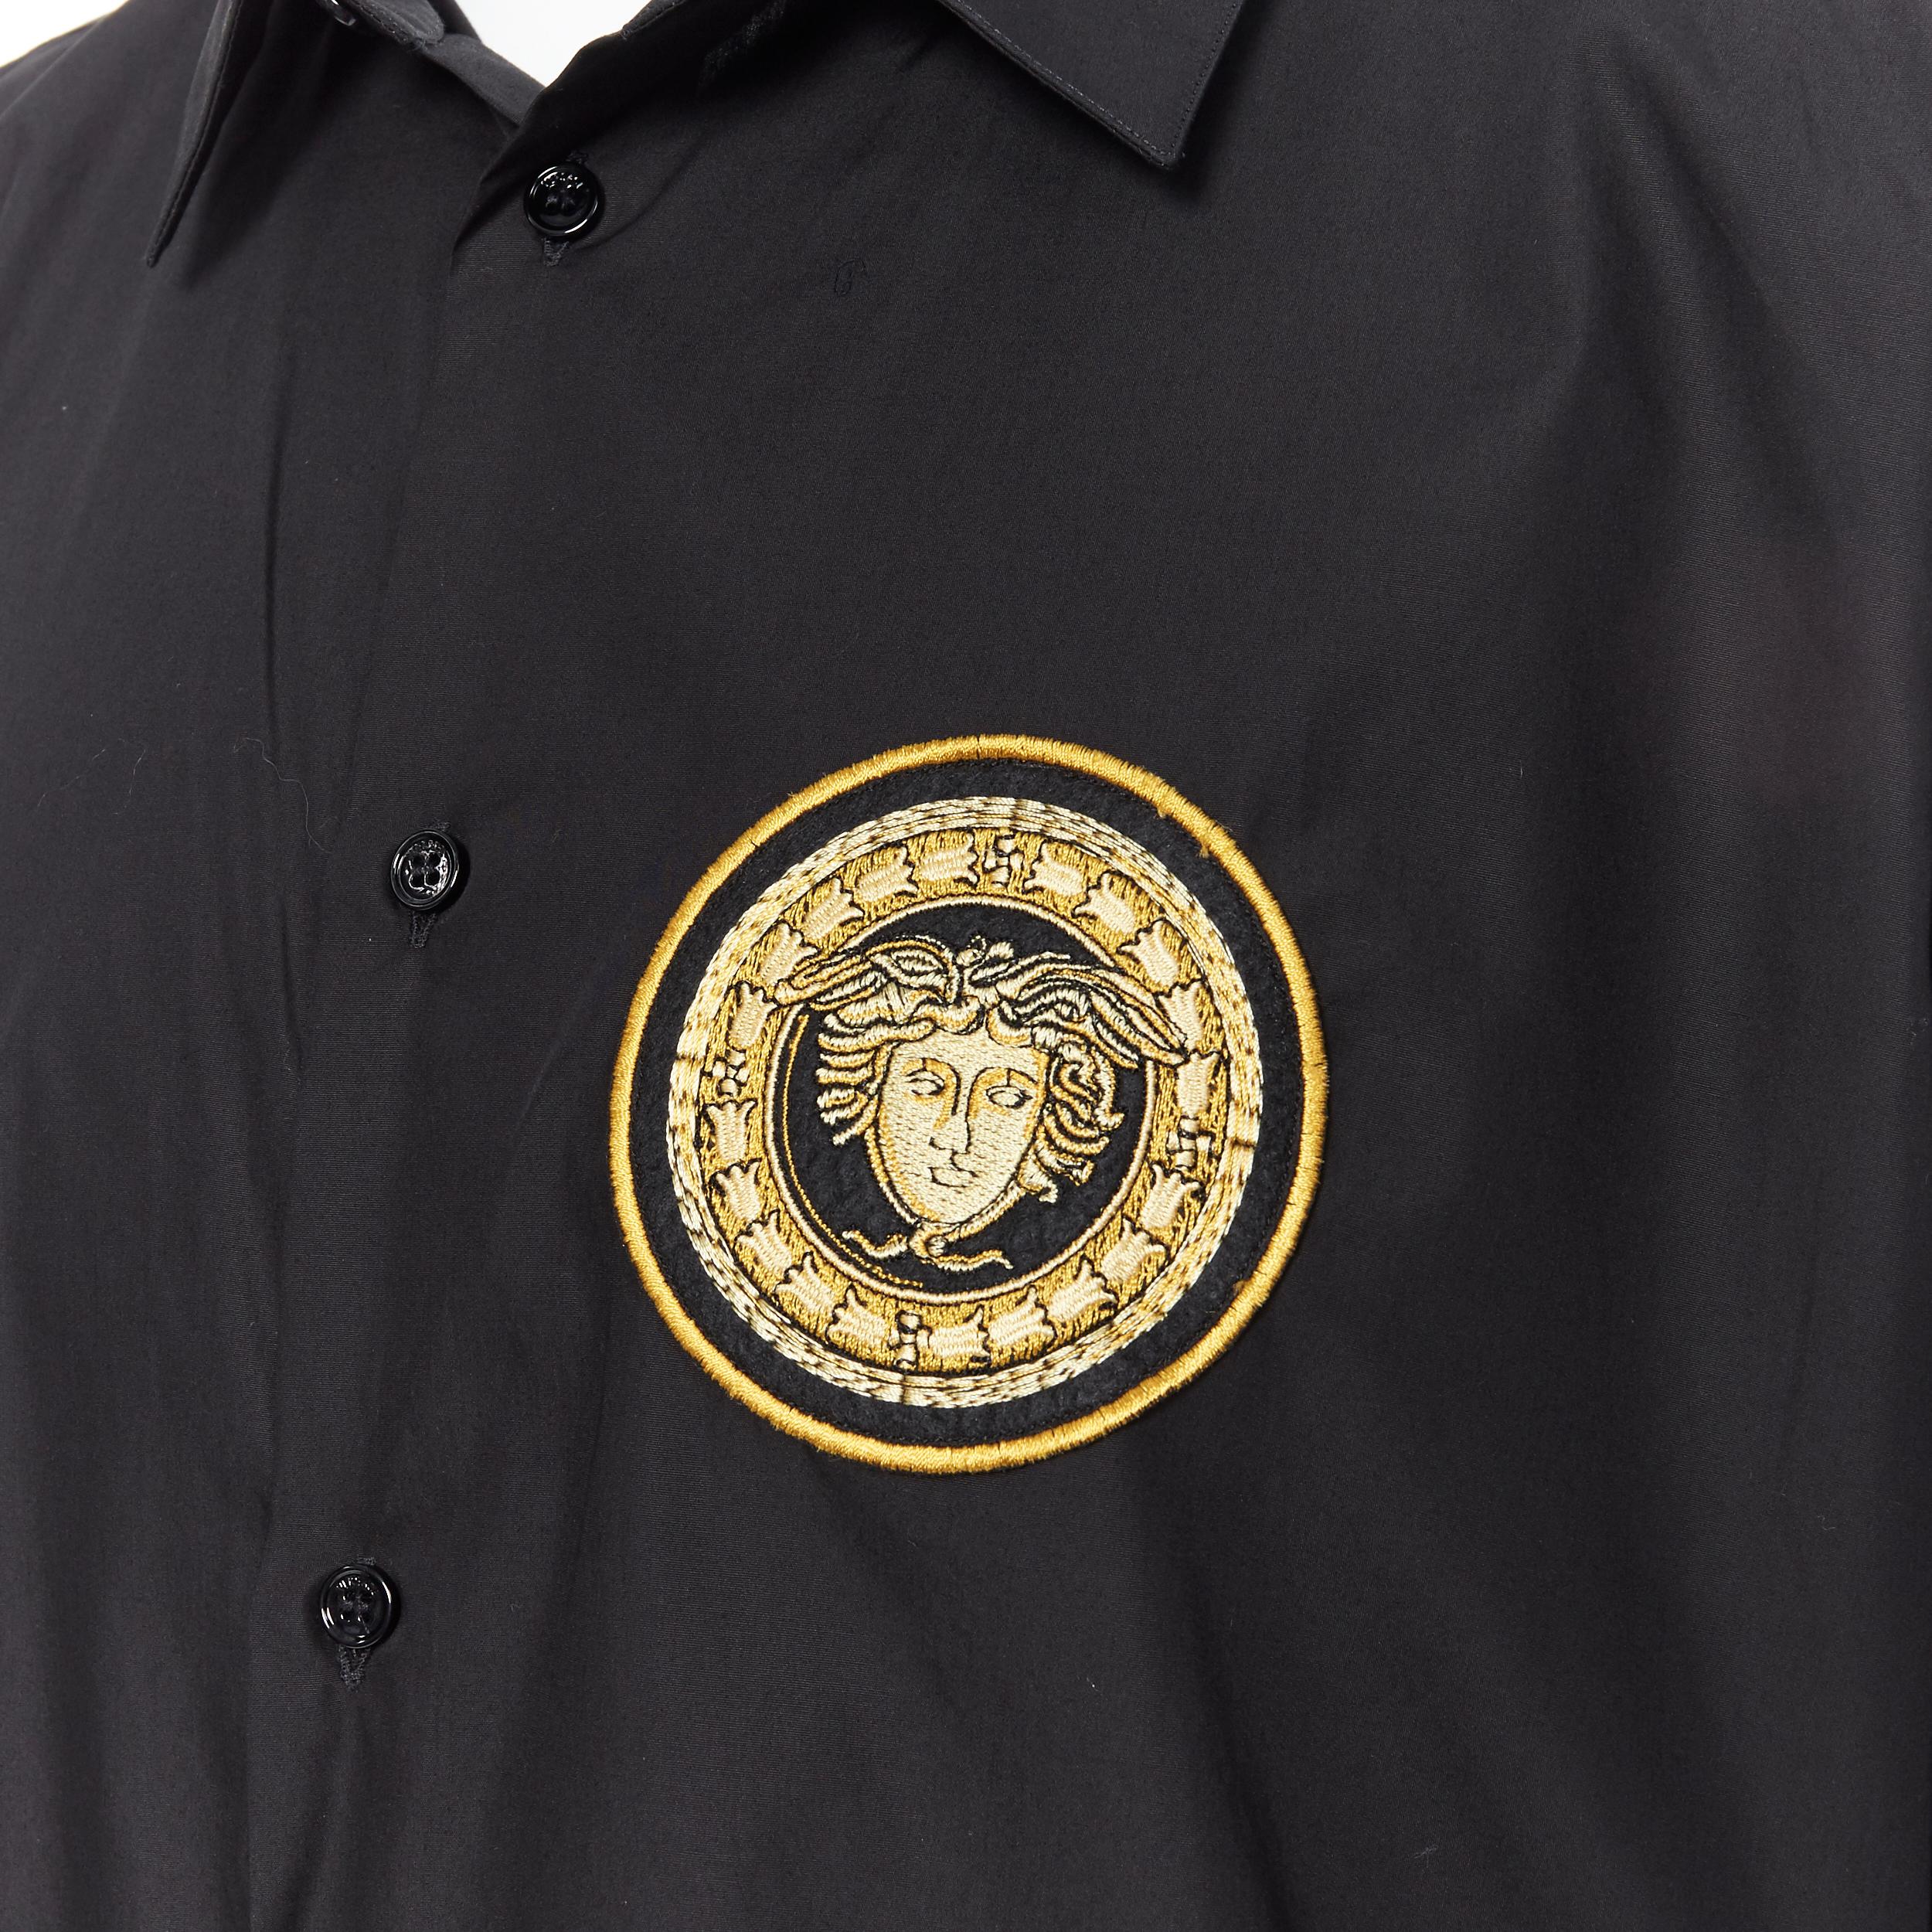 new VERSACE 2019 black cotton gold Medusa embroidery long sleeve shirt EU44 XXXL 
Reference: TGAS/A03958 
Brand: Versace 
Designer: Donatella Versace 
Material: Cotton 
Color: Black 
Pattern: Other 
Closure: Button 
Estimated Retail Price: US $420